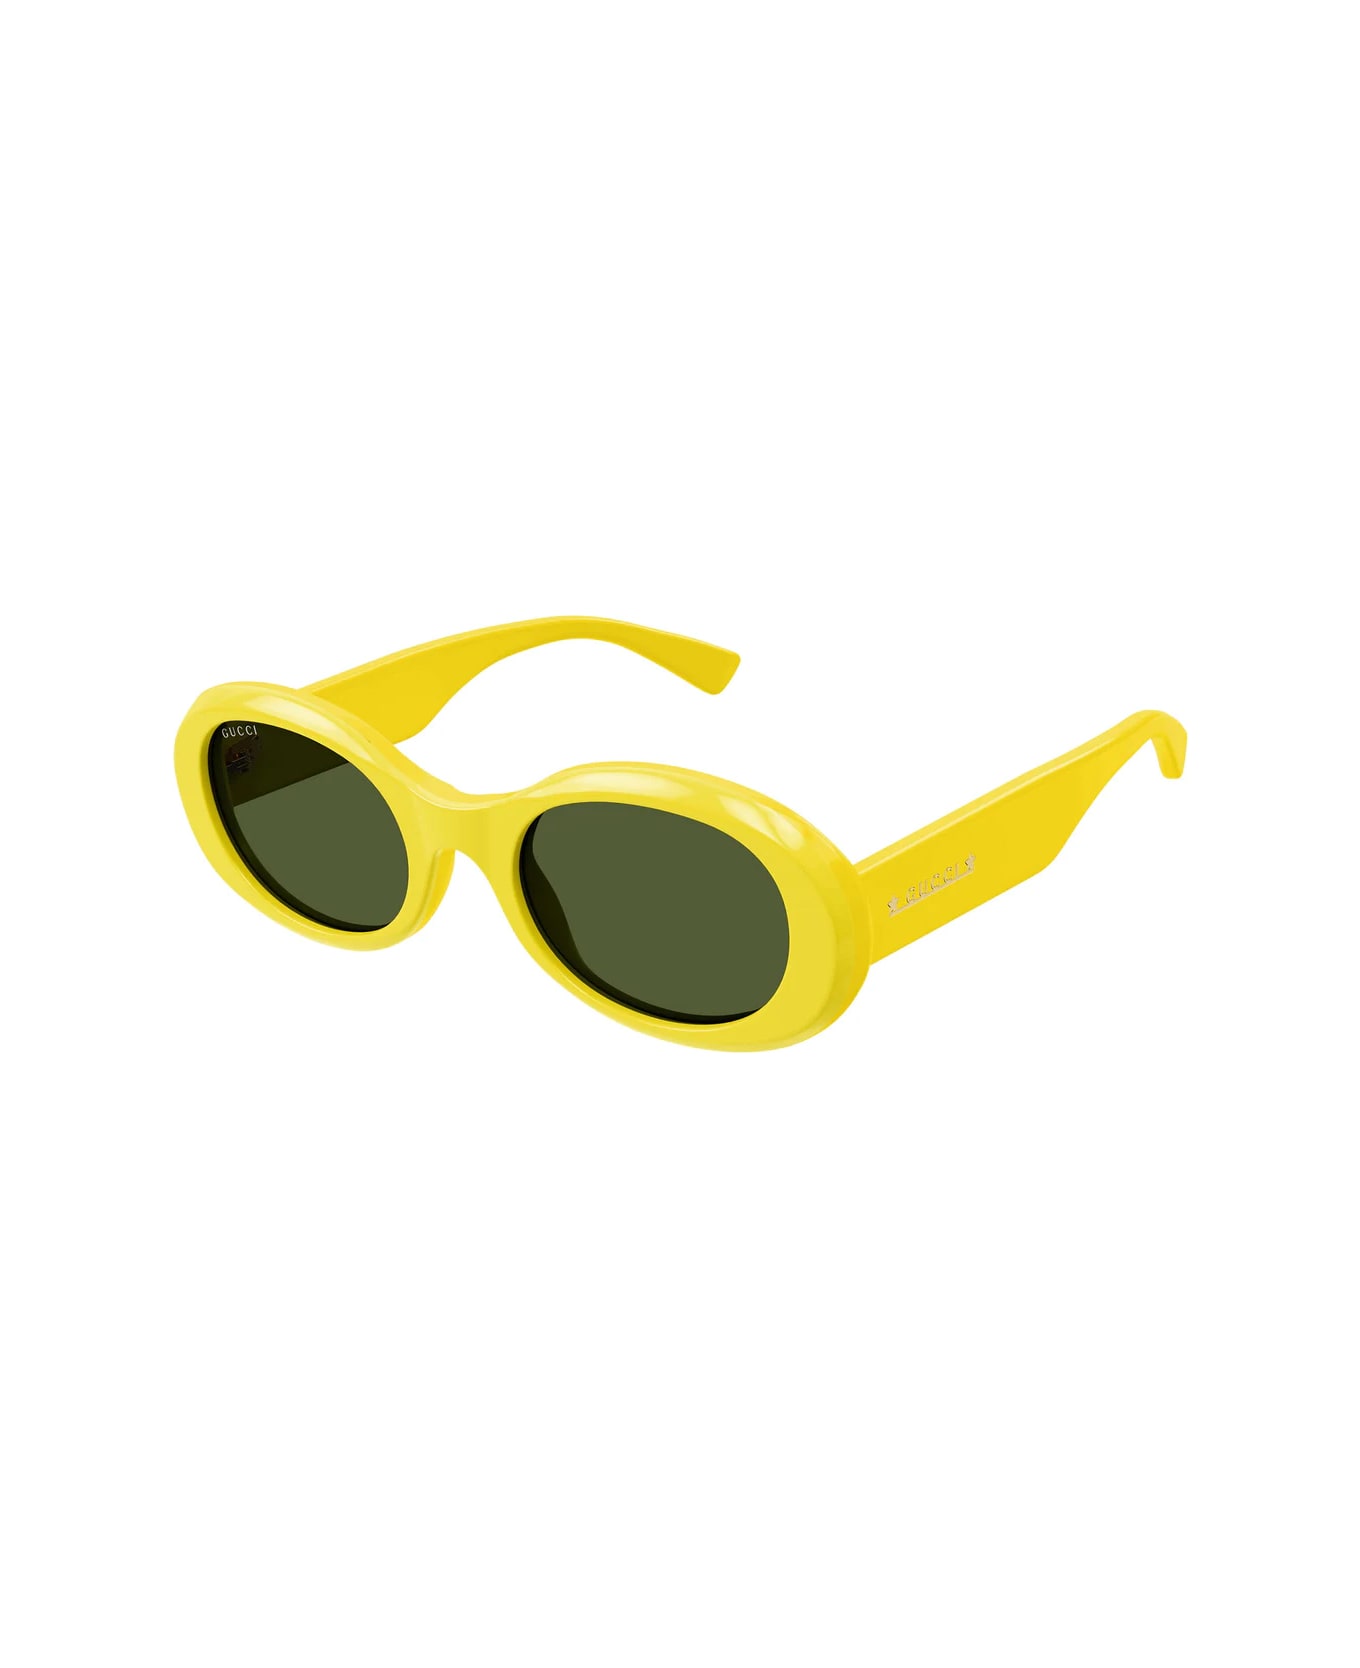 Gucci Eyewear Gg1587s Linea Lettering 004 Peoples sunglasses - Giallo